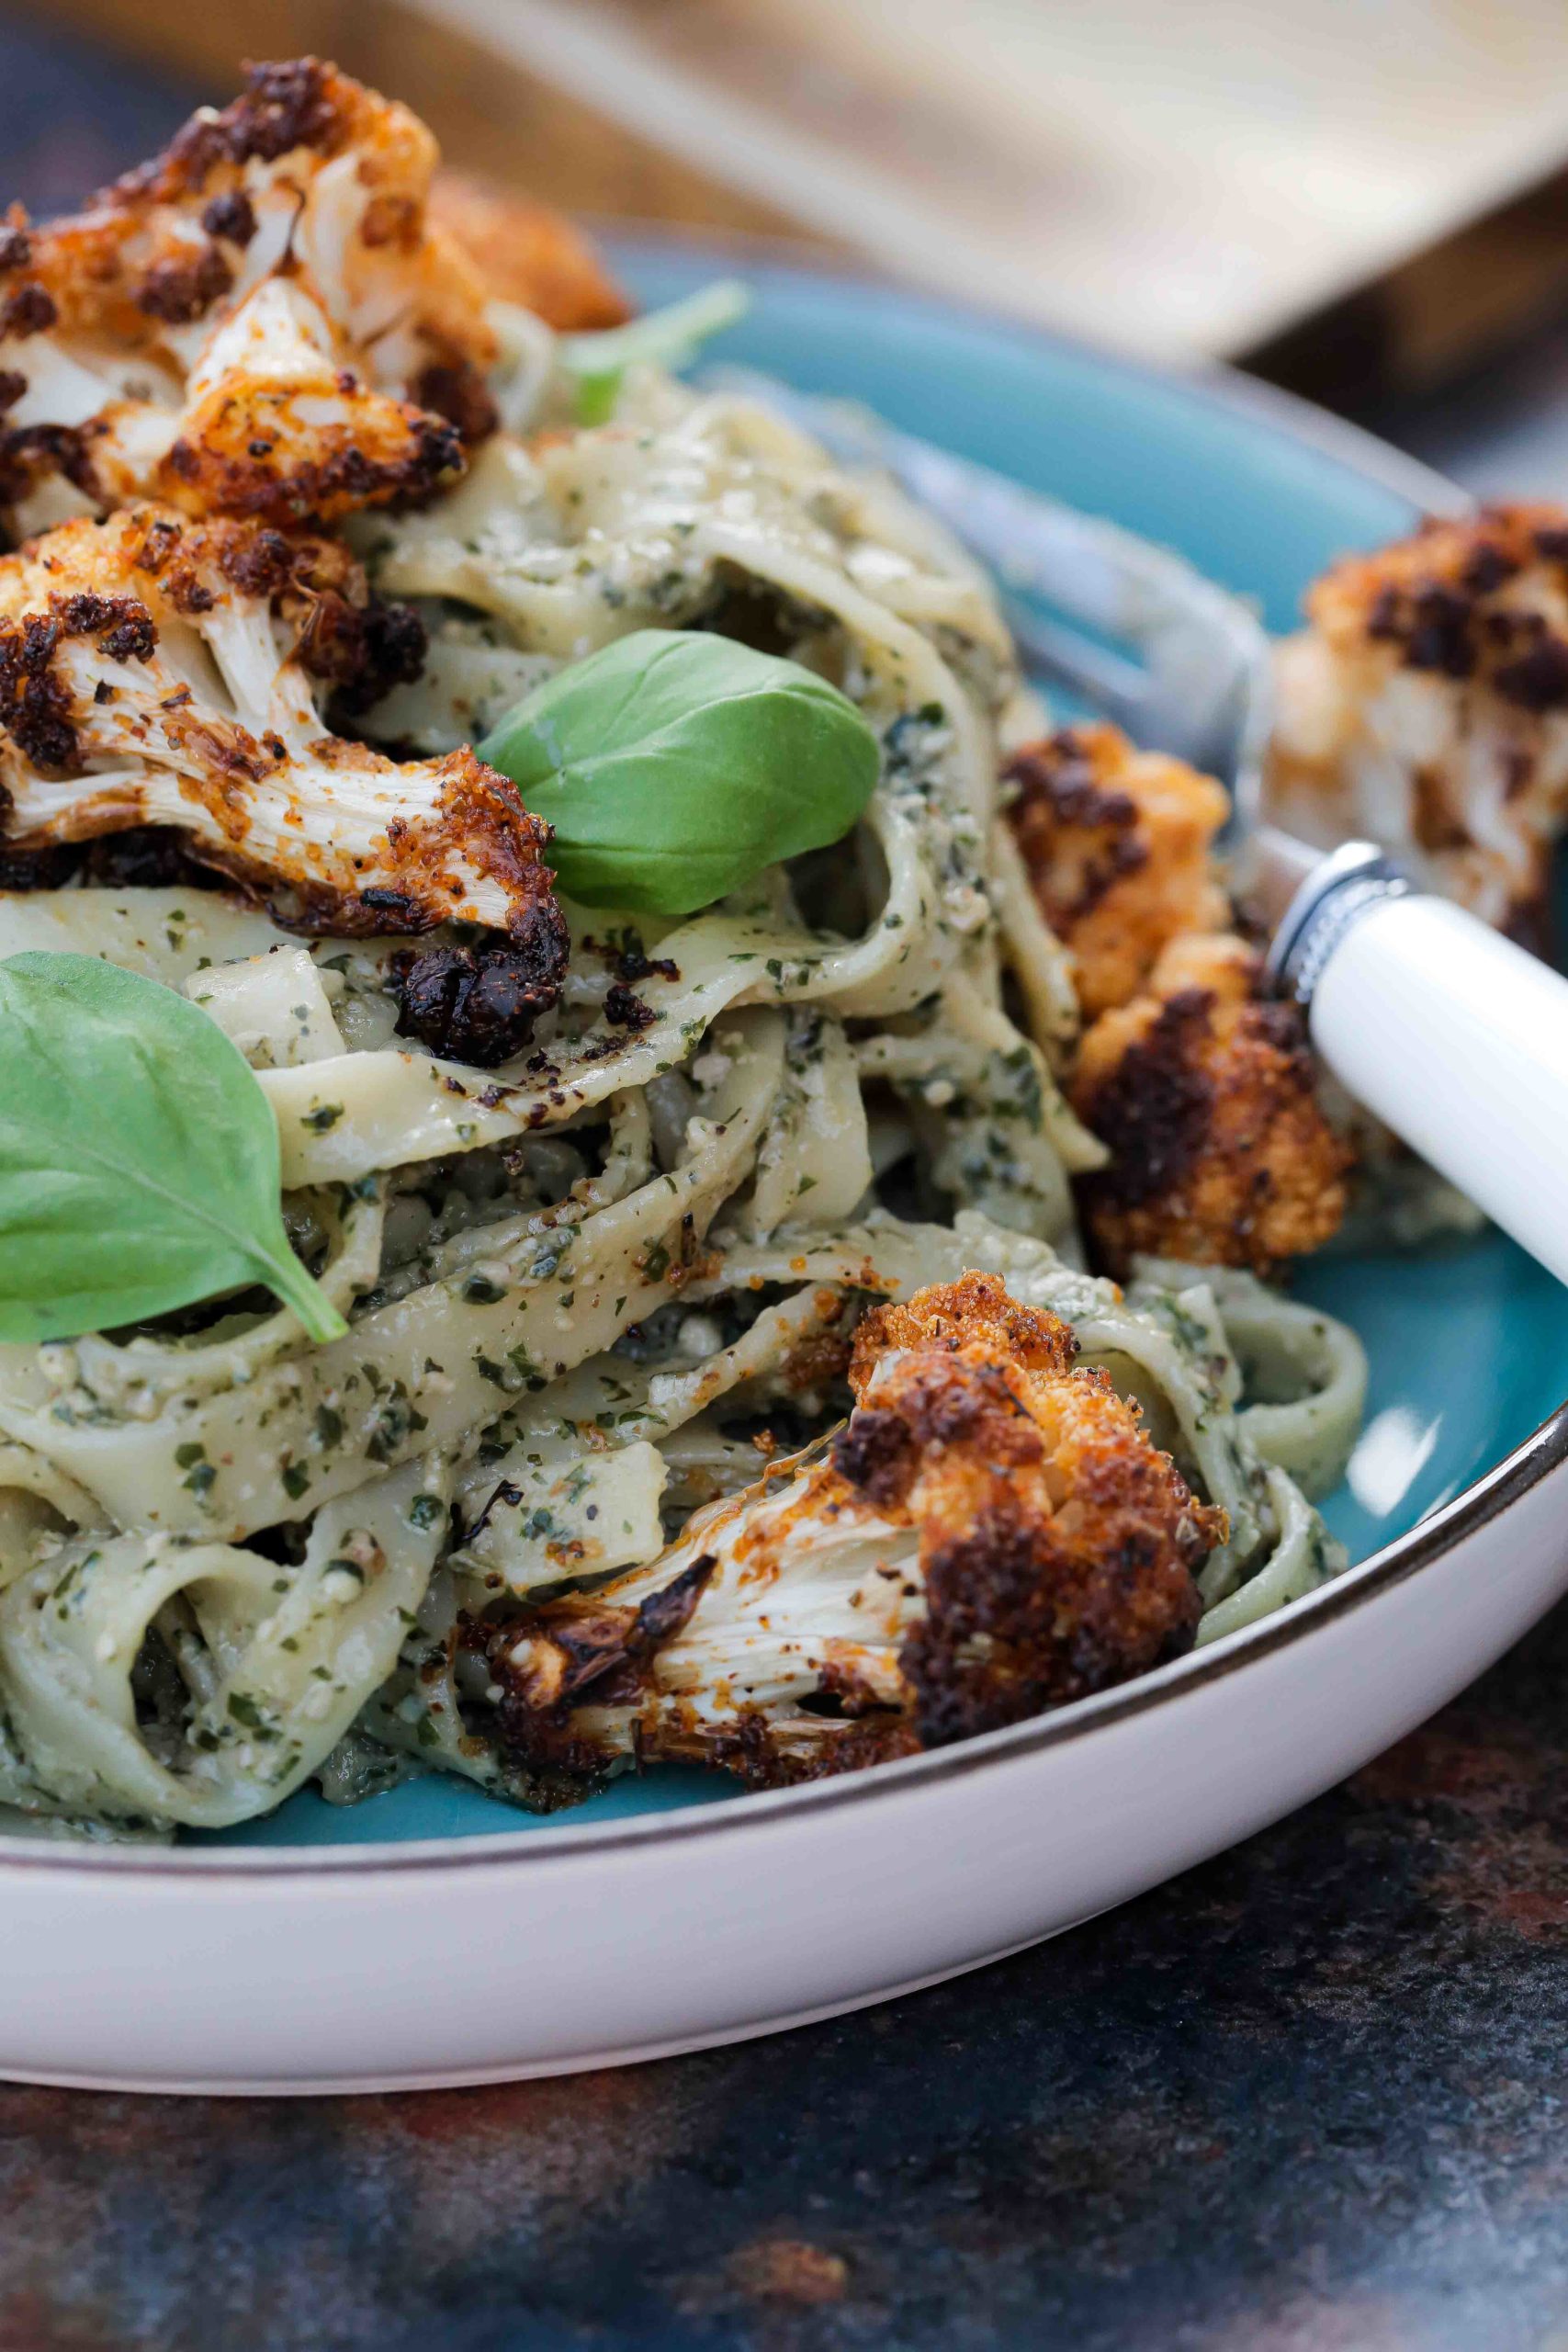 Herby basil pesto stirred through tagliatelle and topped with lightly spiced crispy roasted cauliflower. A lovely contrast of textures and flavours that work perfectly together for an easy weeknight meal or date night deliciousness! Recipe on thecookandhim.com | #veganpesto #roastcauliflower #veganmeal #vegandinner #cauliflowerrecipes